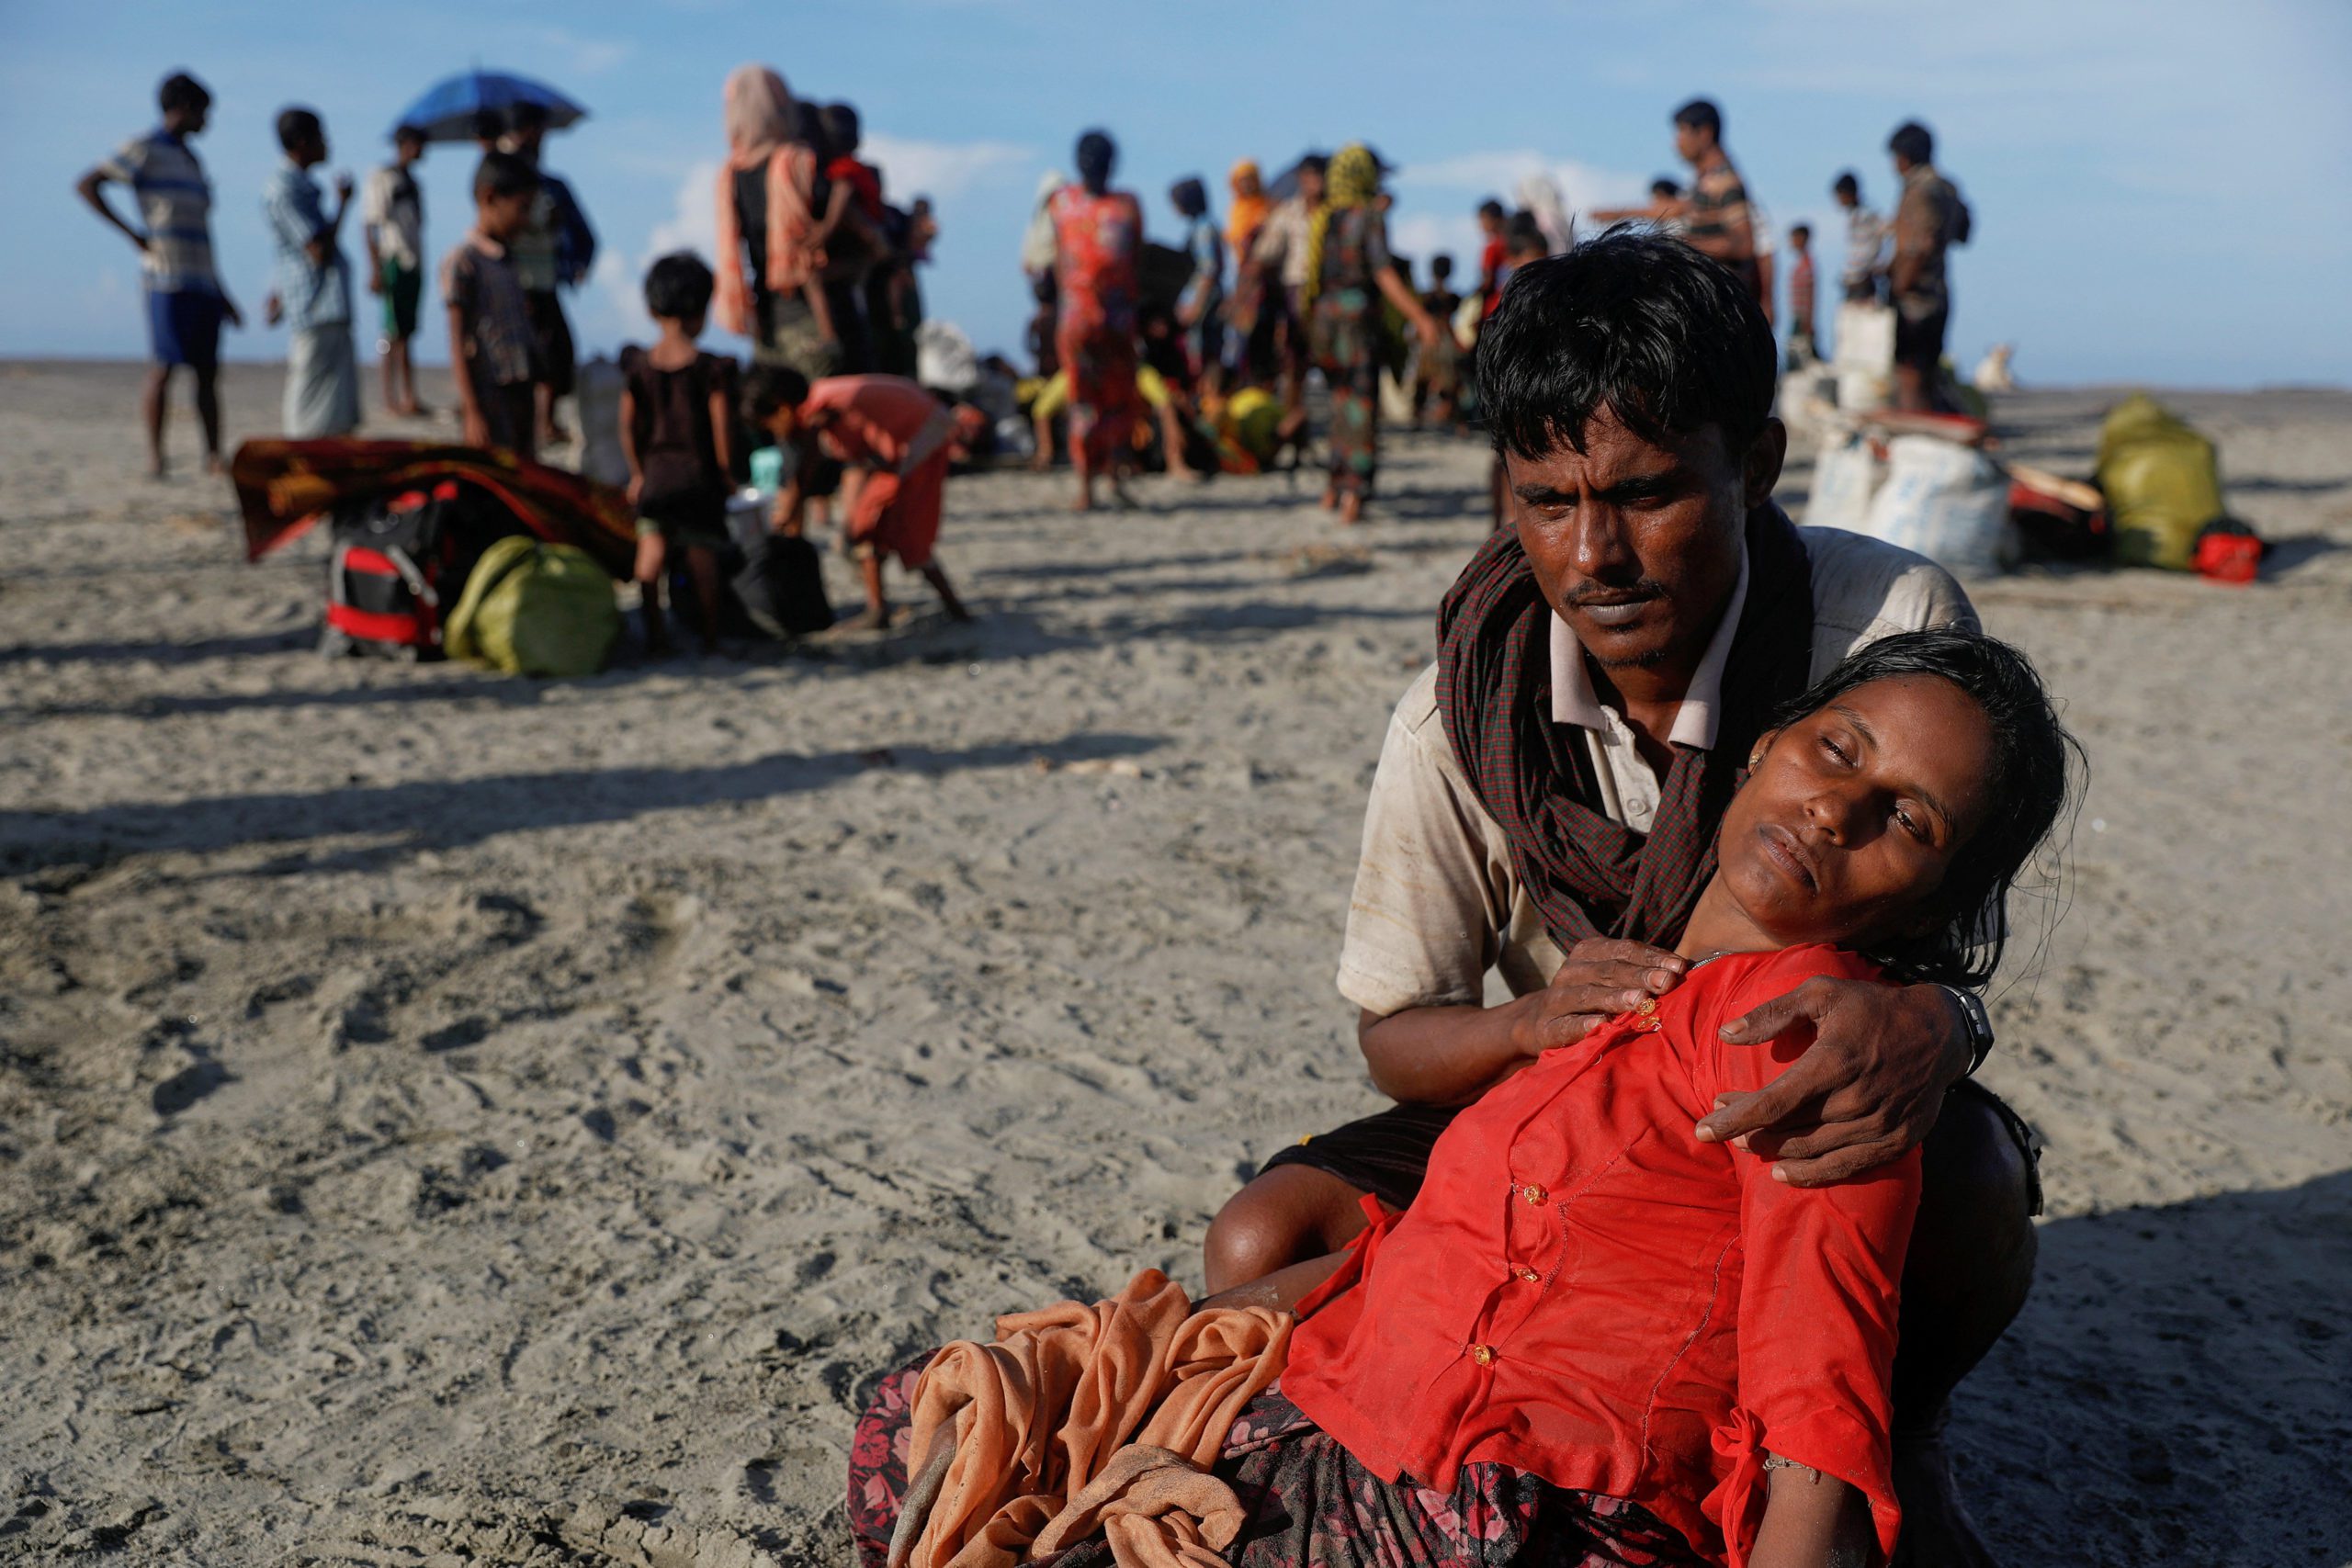 Arif Ullah, who said his village was burnt down and relatives killed by Myanmar soldiers, comforts his wife Shakira, who collapsed from exhaustion as fleeing Rohingya refugees crossed into Bangladesh on a wooden boat in 2017. REUTERS/Damir Sagolj